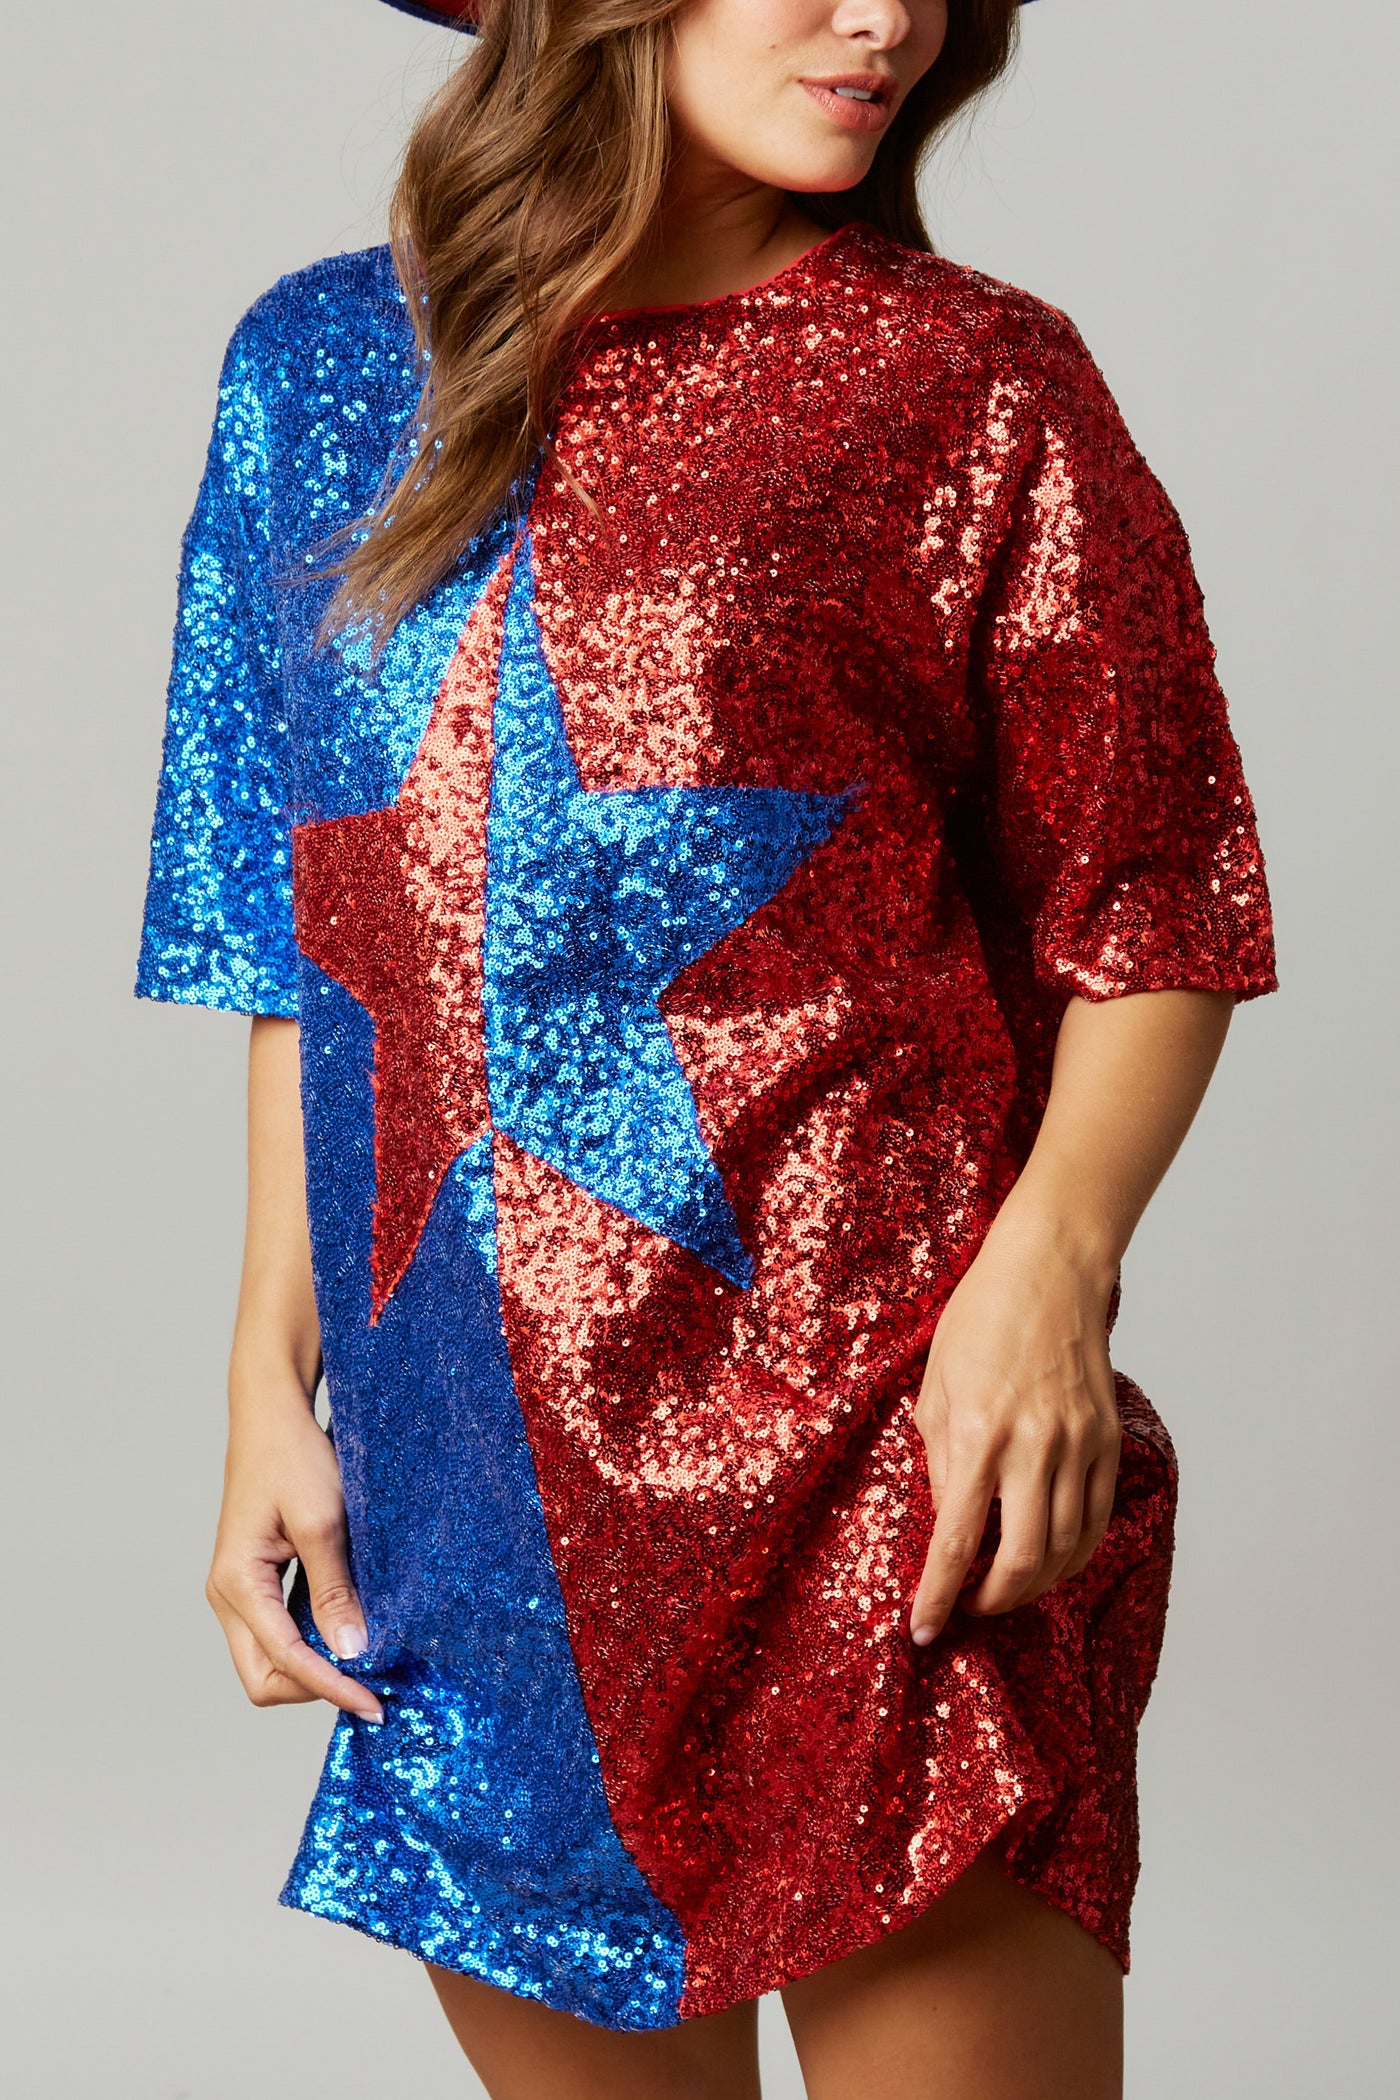 Big Reputation Color Block Sequin Star Dress in Red/Blue